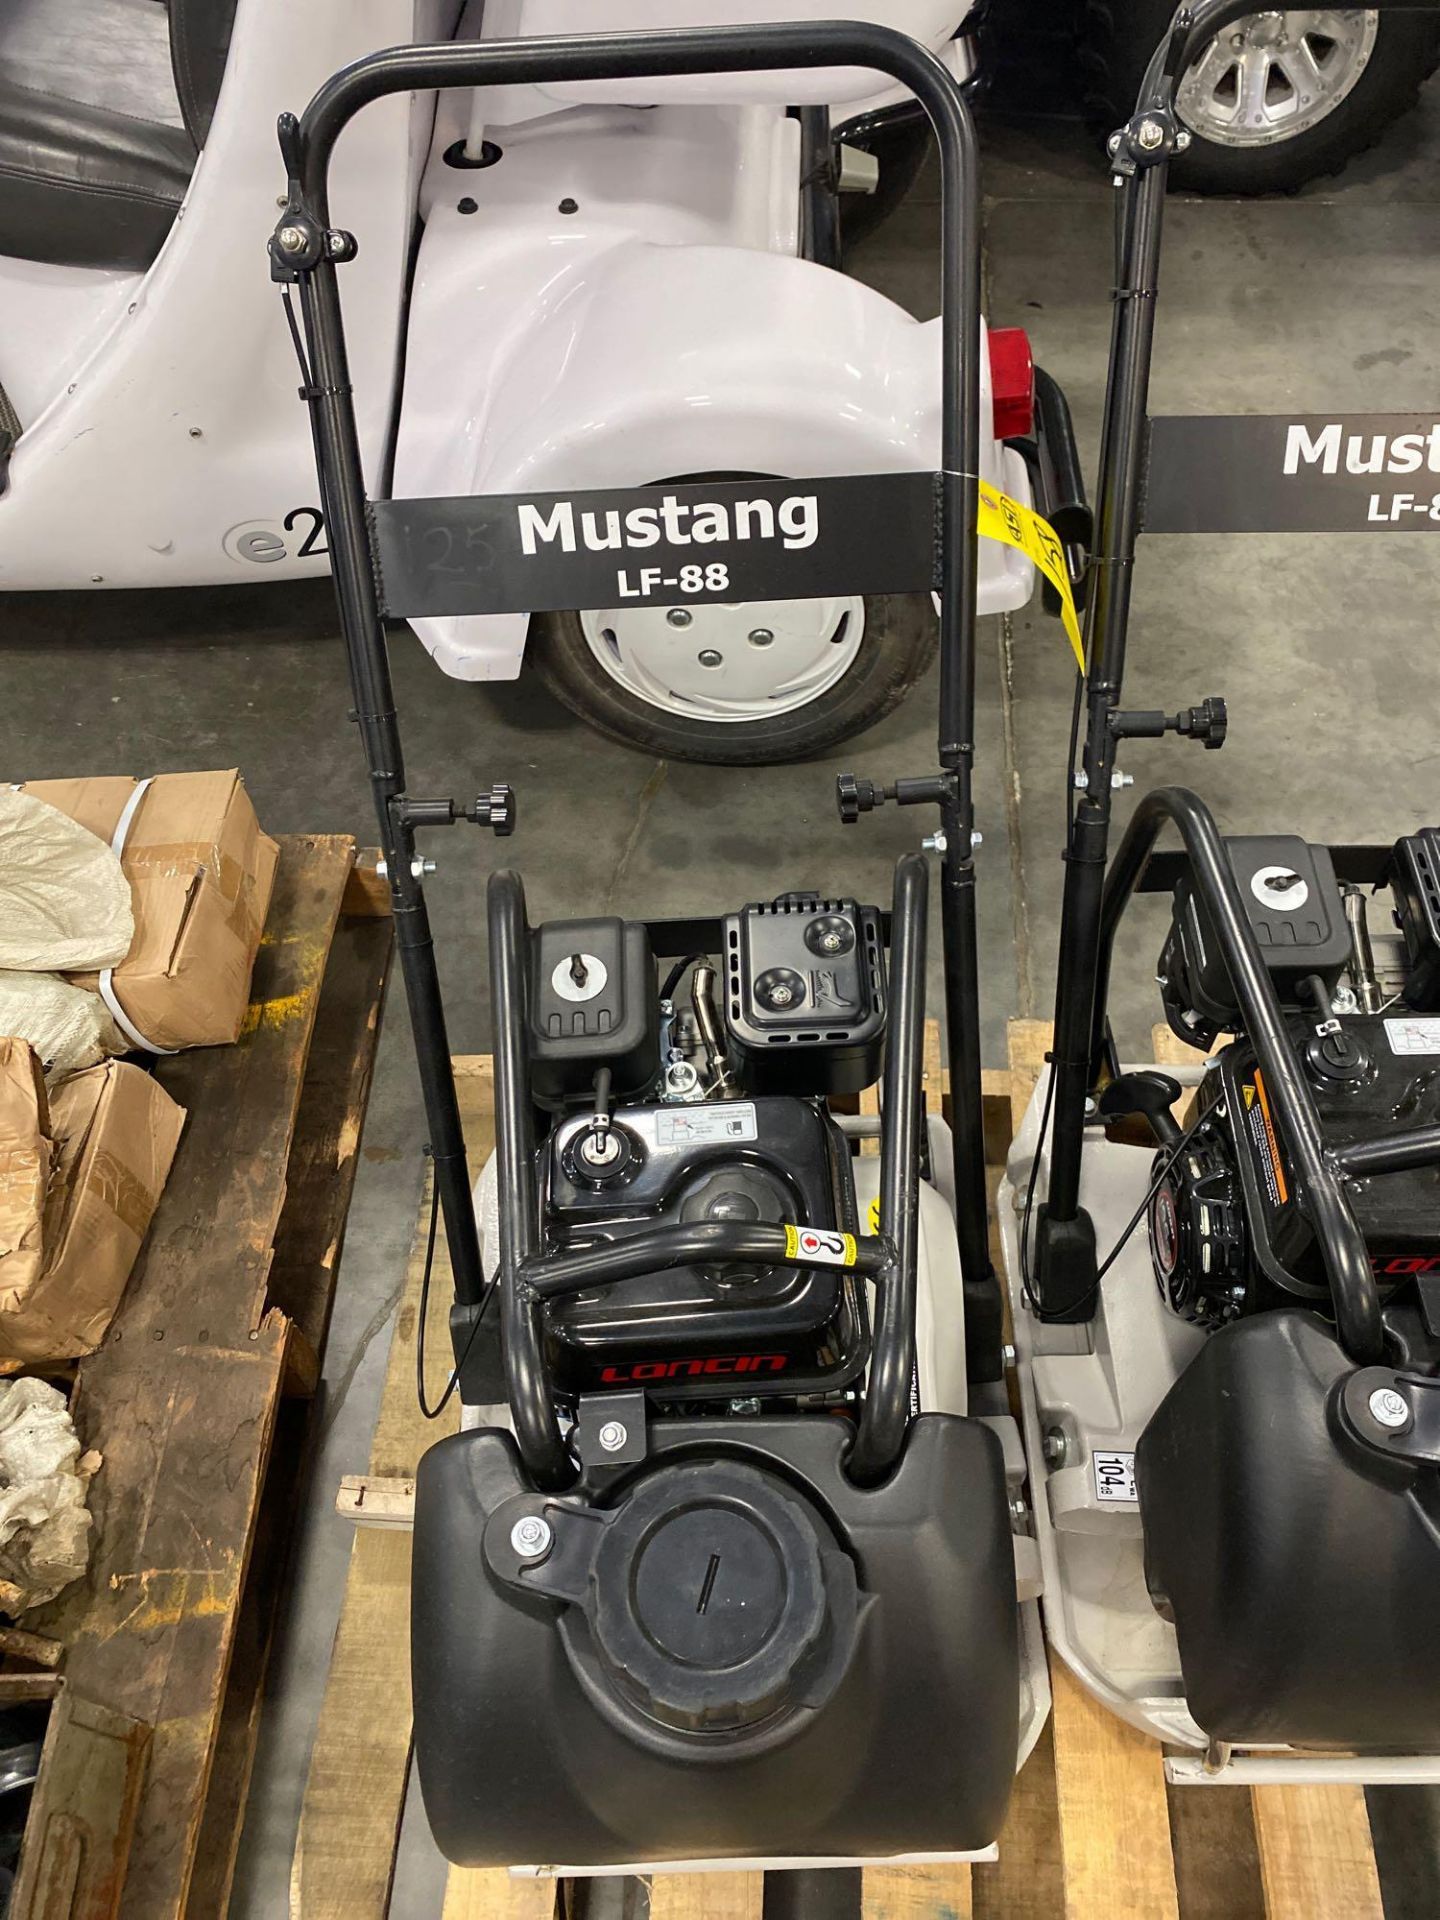 NEW/UNUSED MUSTANG LF-88 PLATE COMPACTOR - Image 2 of 5